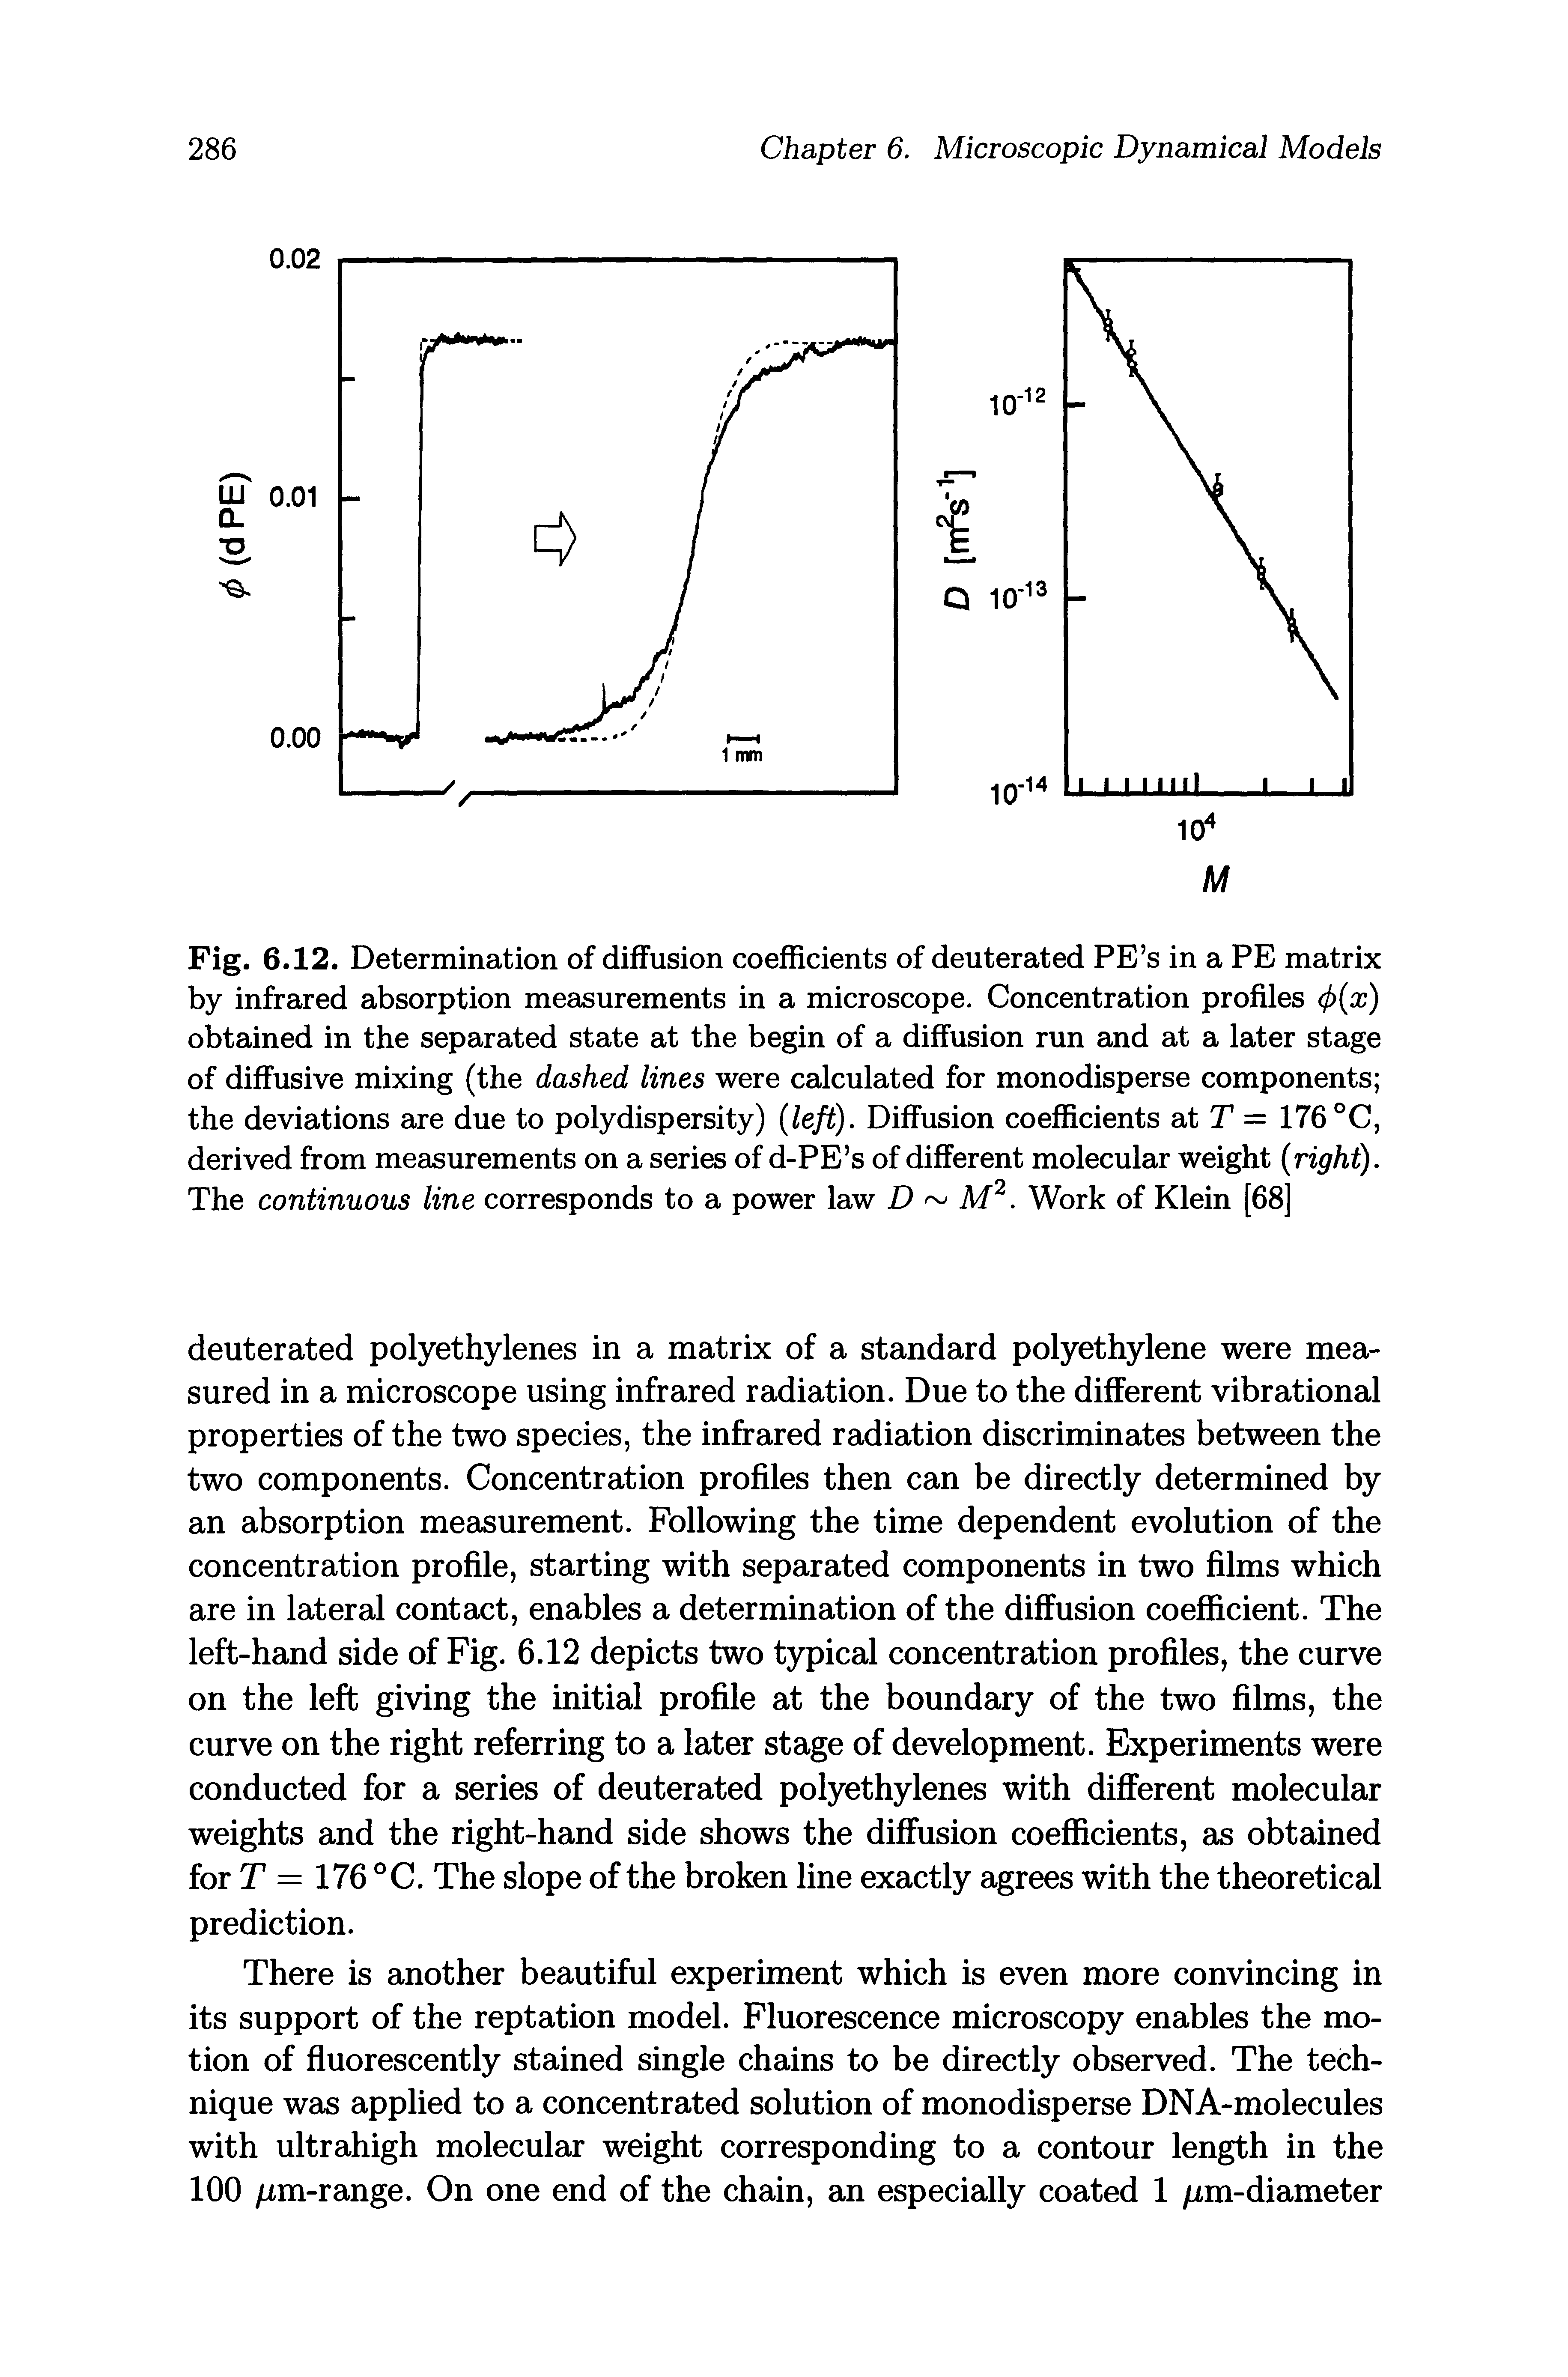 Fig. 6.12. Determination of diffusion coefficients of deuterated PE s in a PE matrix by infrared absorption measurements in a microscope. Concentration profiles obtained in the separated state at the begin of a diffusion run and at a later stage of diffusive mixing (the dashed lines were calculated for monodisperse components the deviations are due to polydispersity) (left). Diffusion coefficients at T = 176°C, derived from measurements on a series of d-PE s of different molecular weight (right). The continuous line corresponds to a power law D M. Work of Klein [68]...